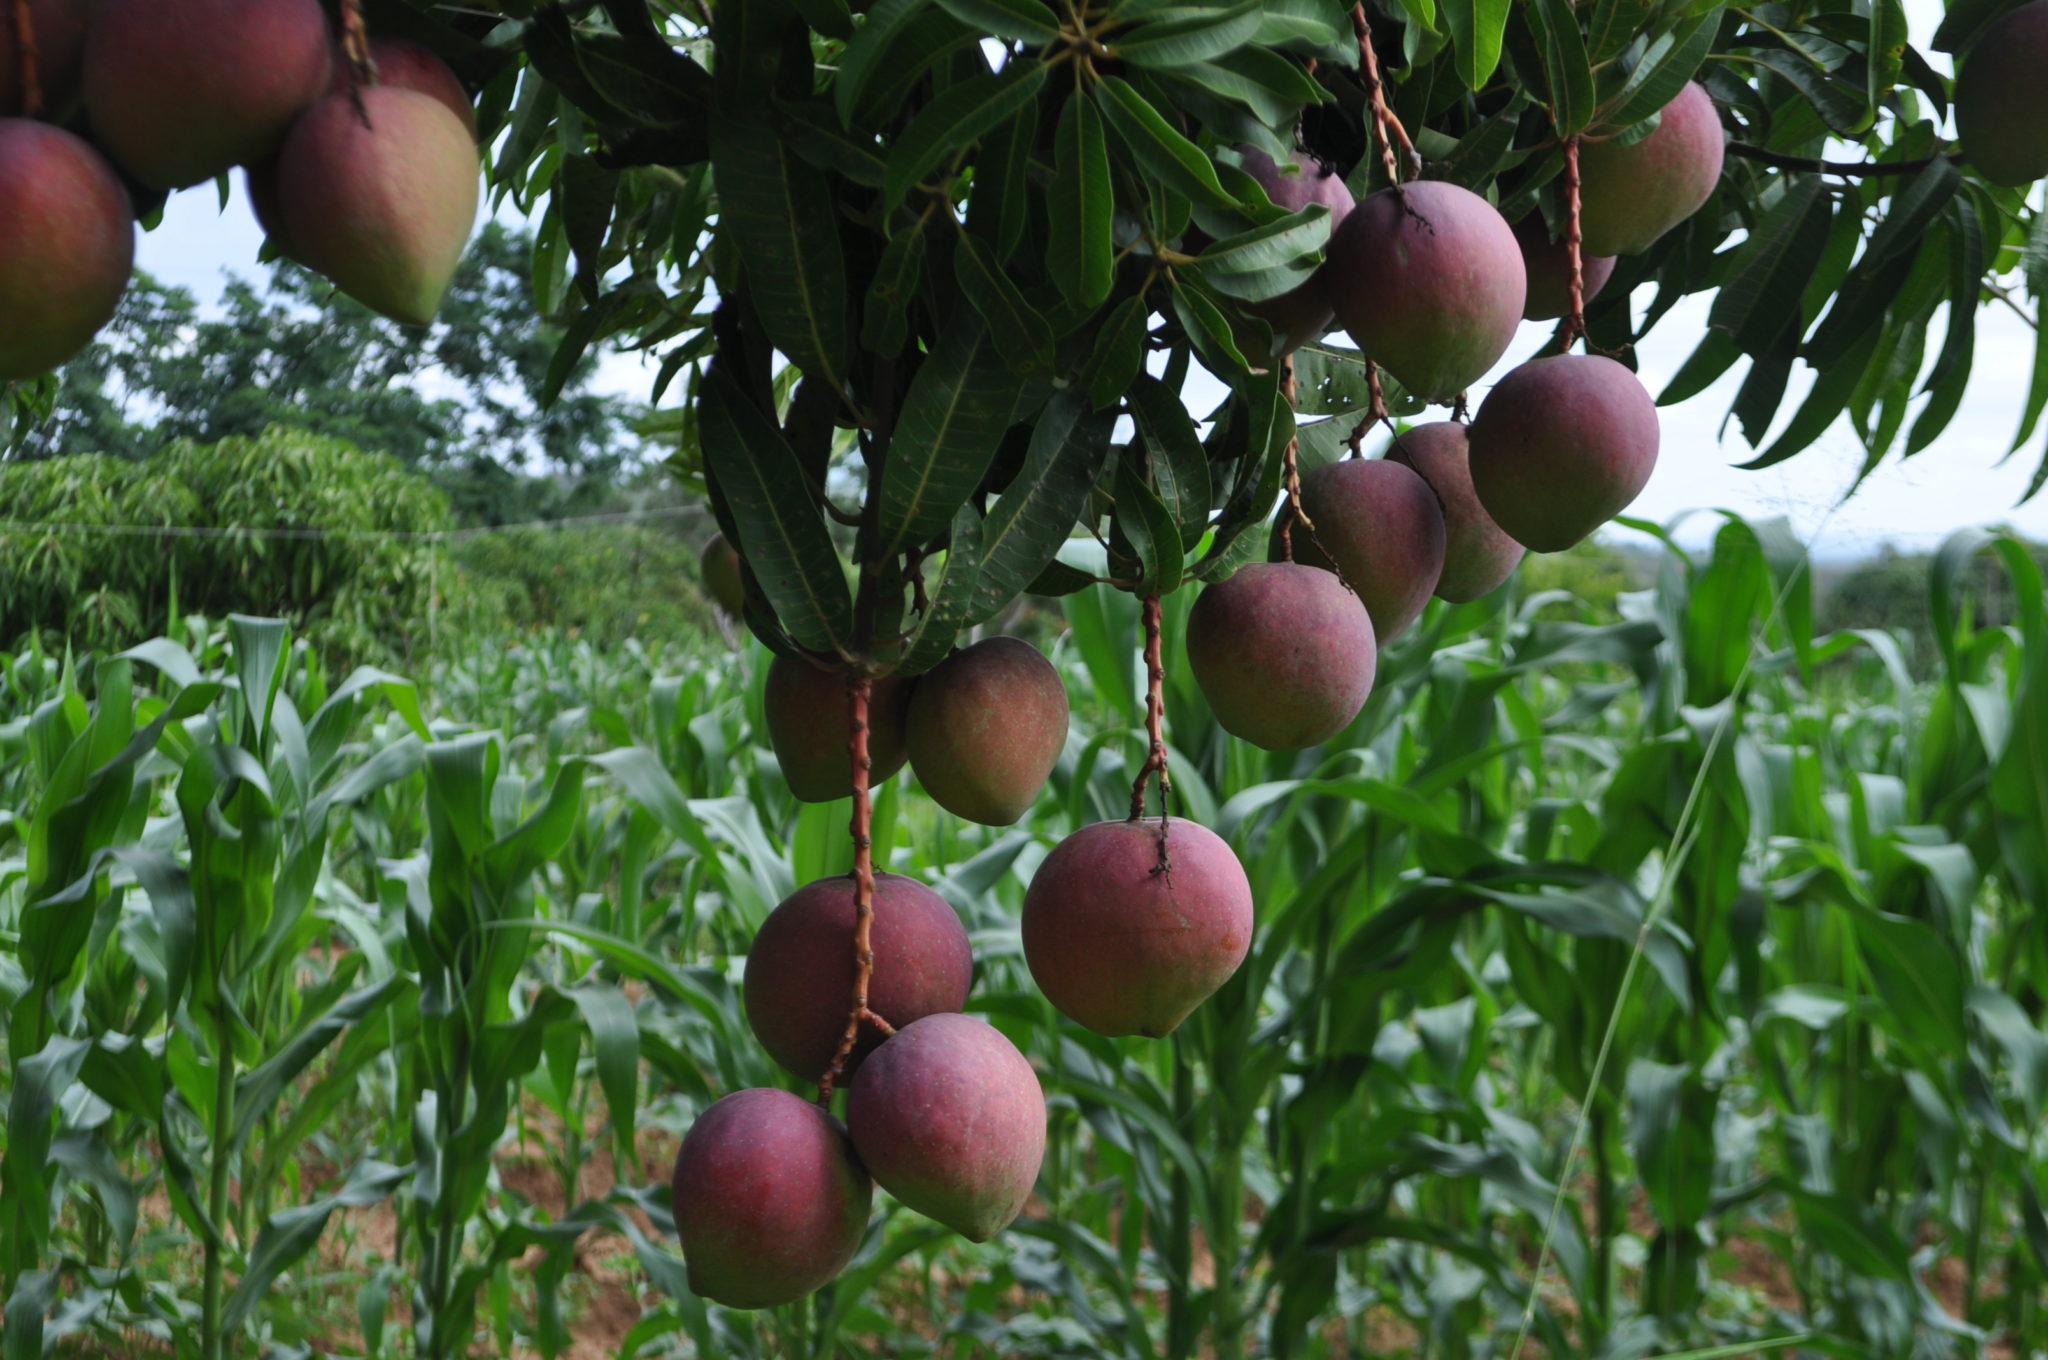 Income from waste mango seeds for smallholders in Kenya